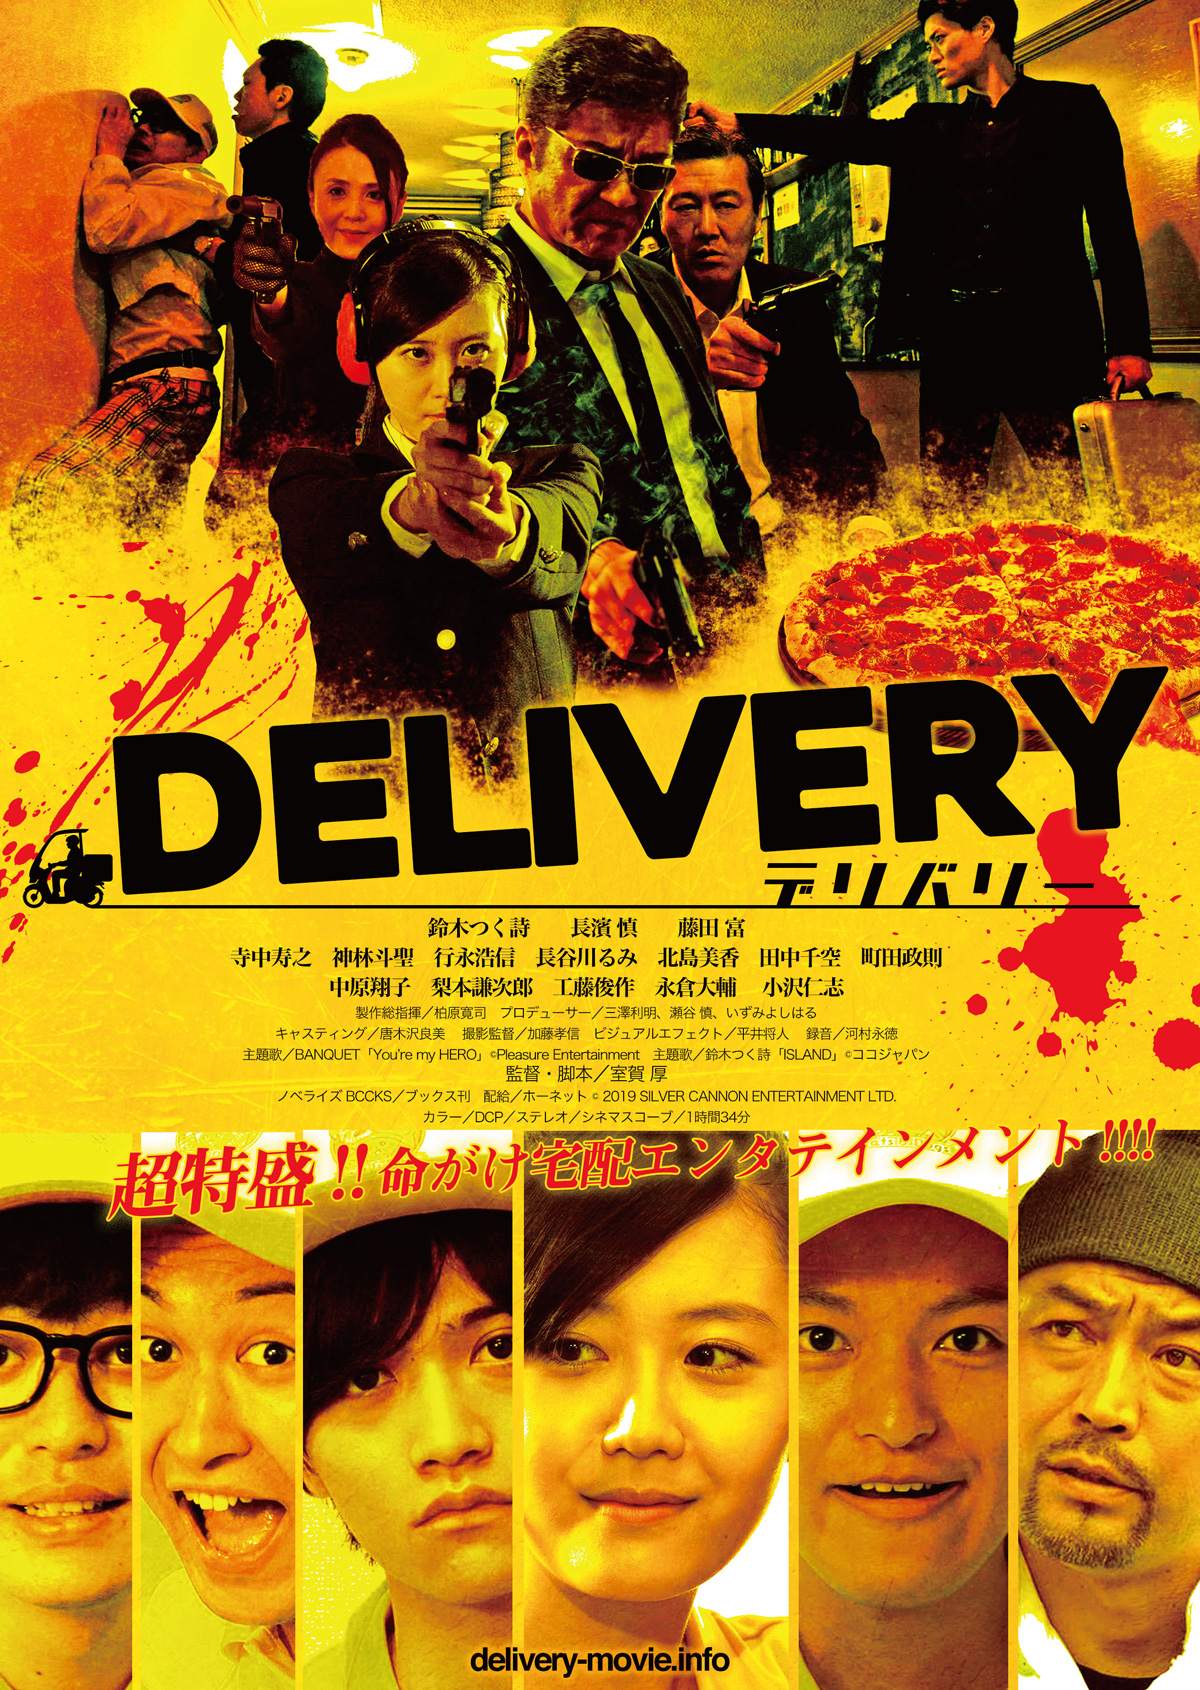 DELIVERY　デリバリーの画像